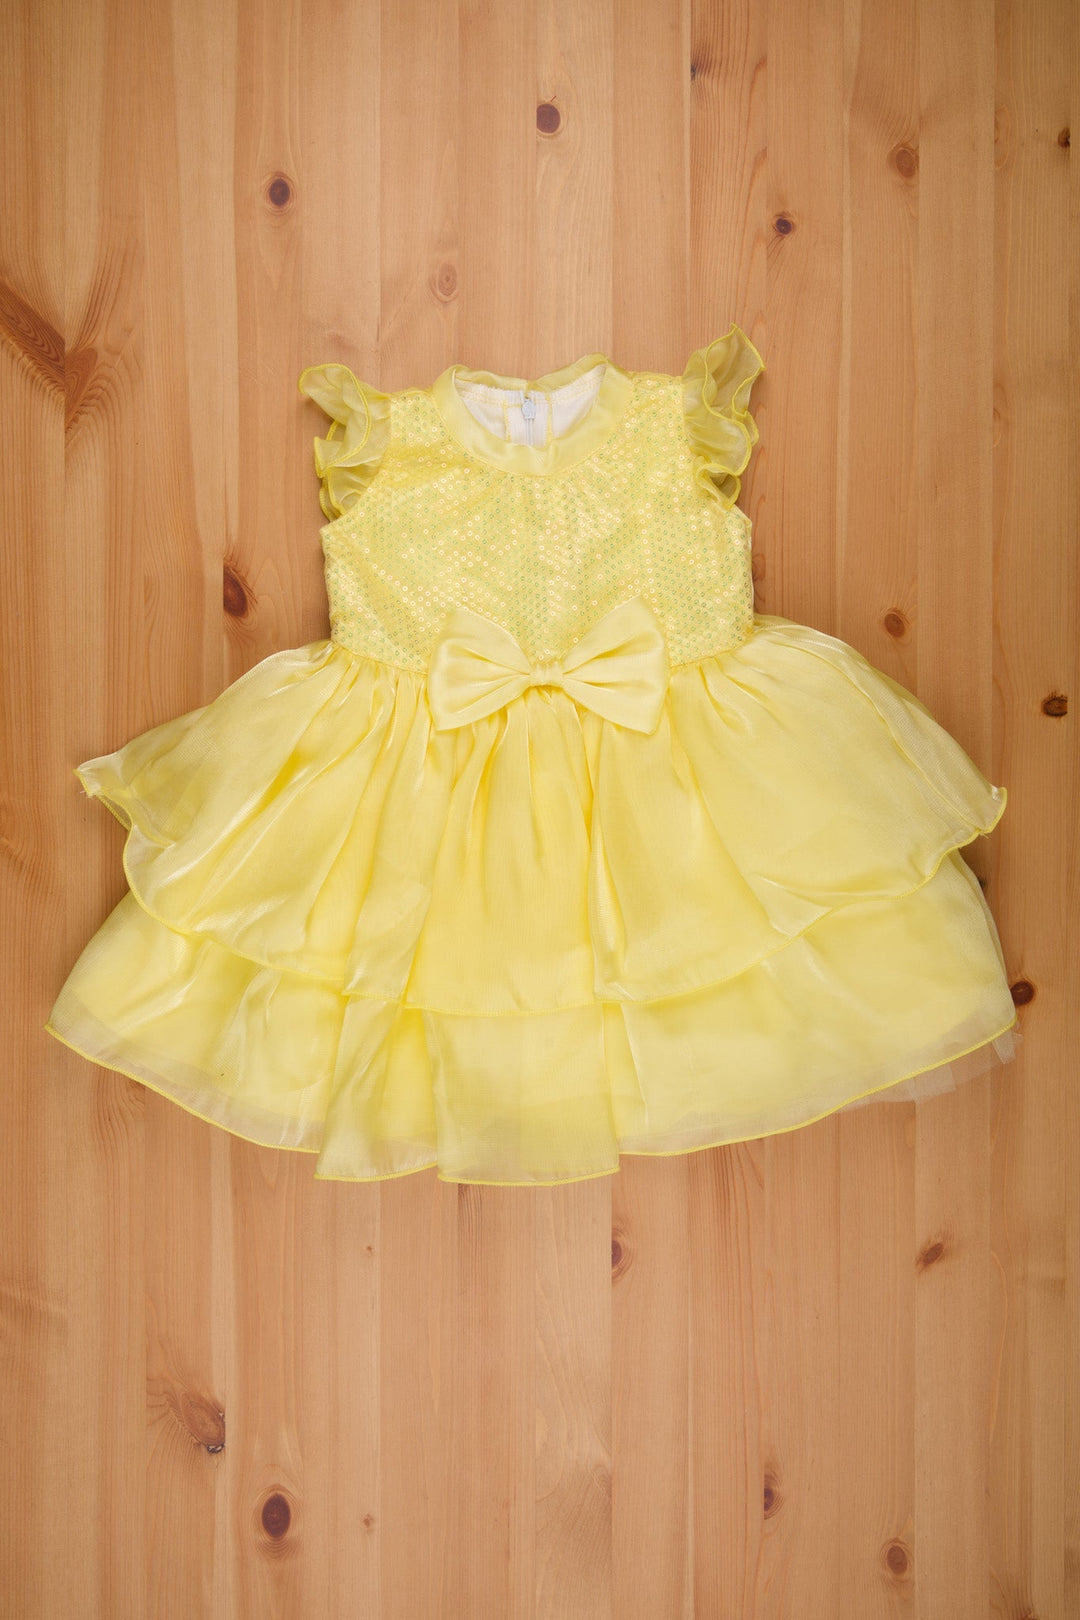 The Nesavu Girls Fancy Party Frock Lemon Yellow Sequin Yoke A-Line Gown for Baby Girls - Monotone Fancy Frock with Bow & Dual Layers Nesavu 16 (1Y) / Yellow / Organza Tissue PF129A-16 Birthday Dress Boutique | Birthday Frock Baby 1 Year | The Nesavu